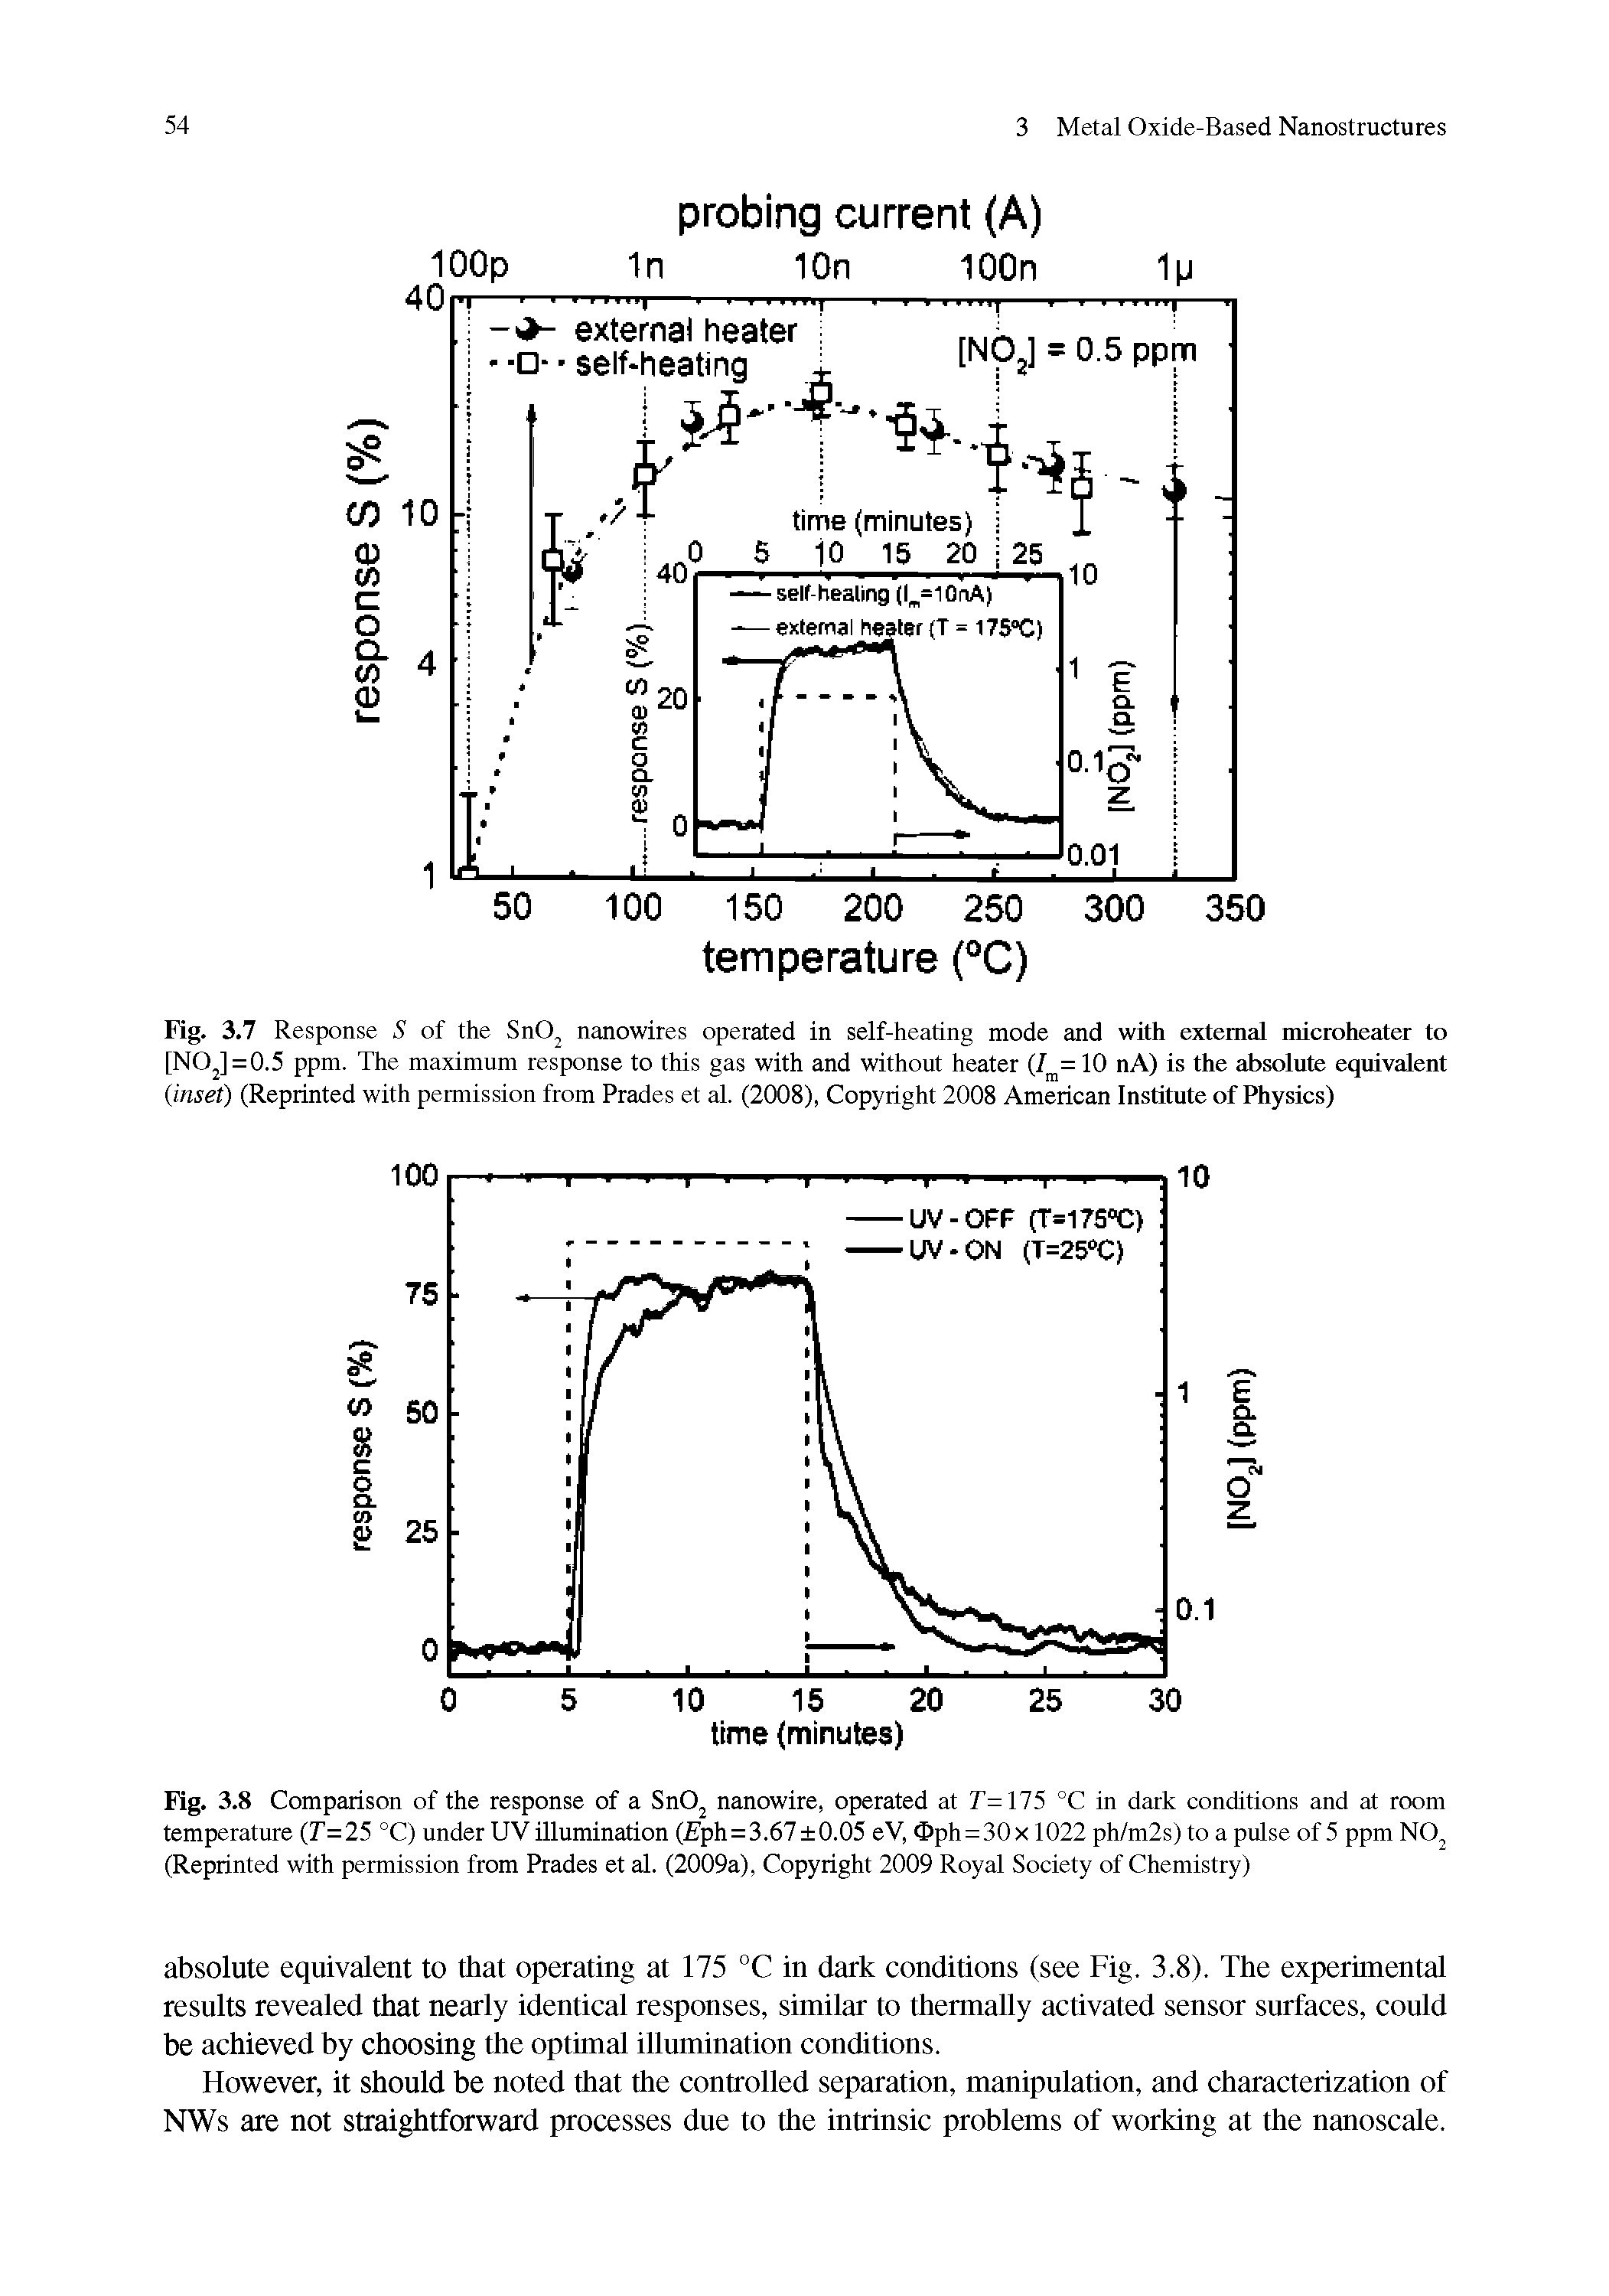 Fig. 3.7 Response S of the SnO nanowires operated in self-heating mode and with extemai microheater to [NOJ = 0.5 ppm. The maximum response to this gas with and without heater (/ =10 nA) is the absolute equivalent (inset) (Reprinted with permission from Prades et al. (2008), Copyright 2008 American Institute of Physics)...